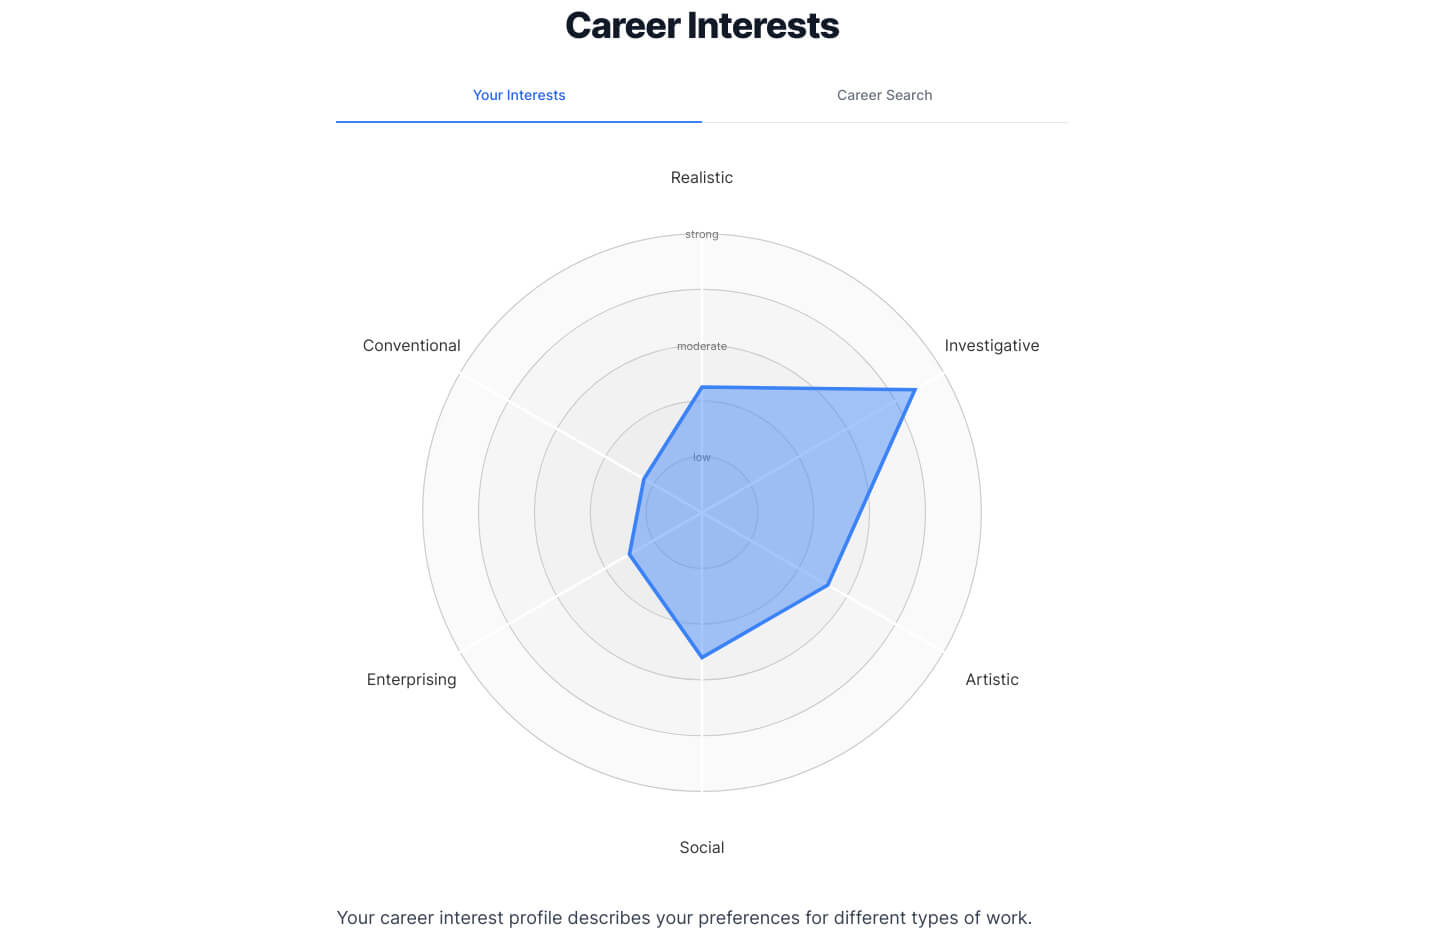 An example of a career interests profile in TraitLab